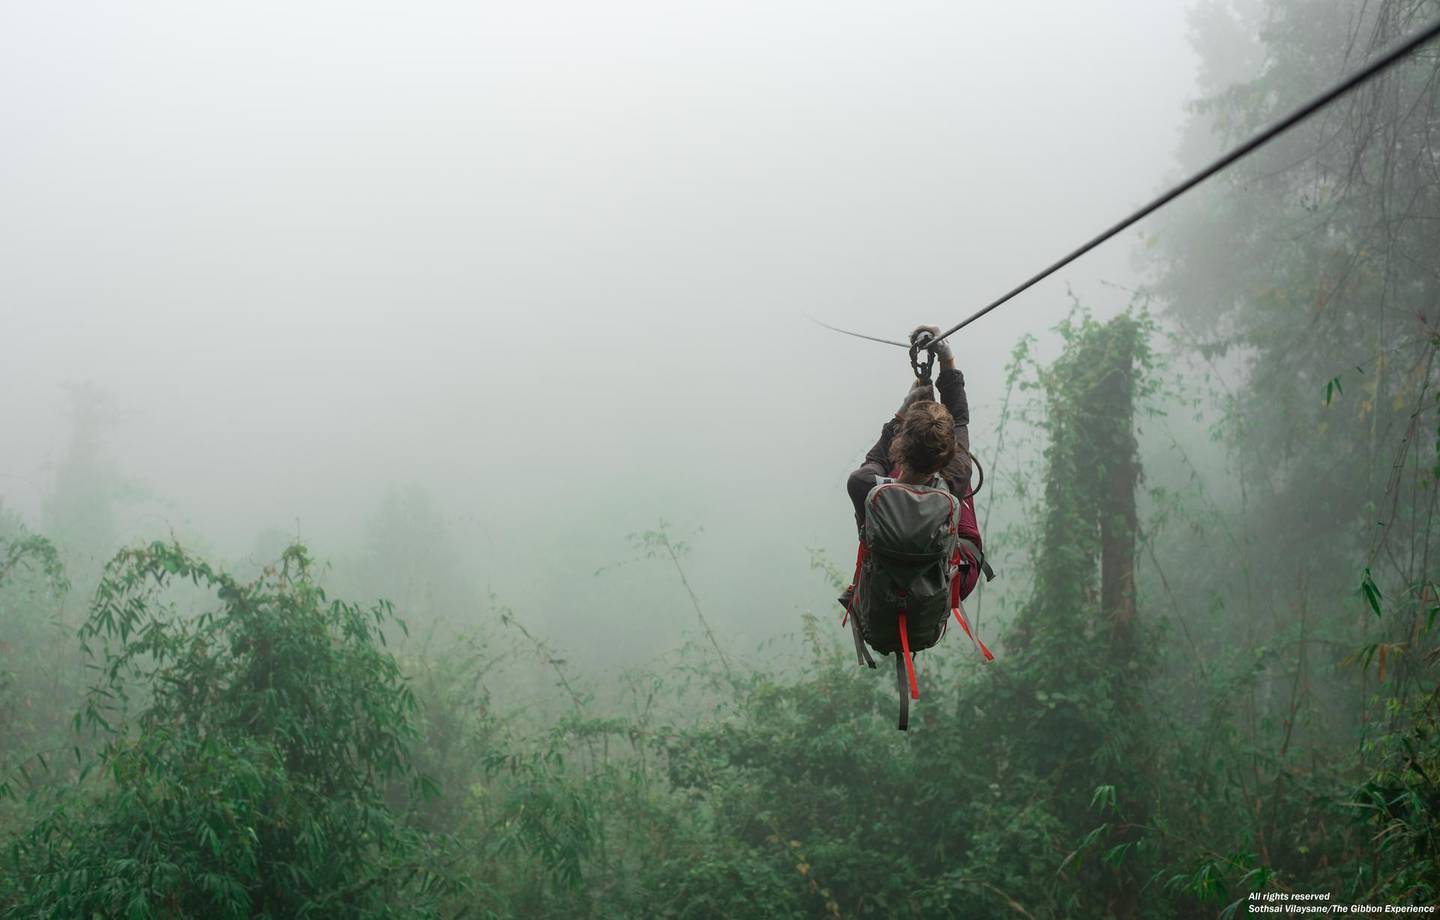 Zip-lining above the jungle canopy. Courtesy Souksamlan Laladeth